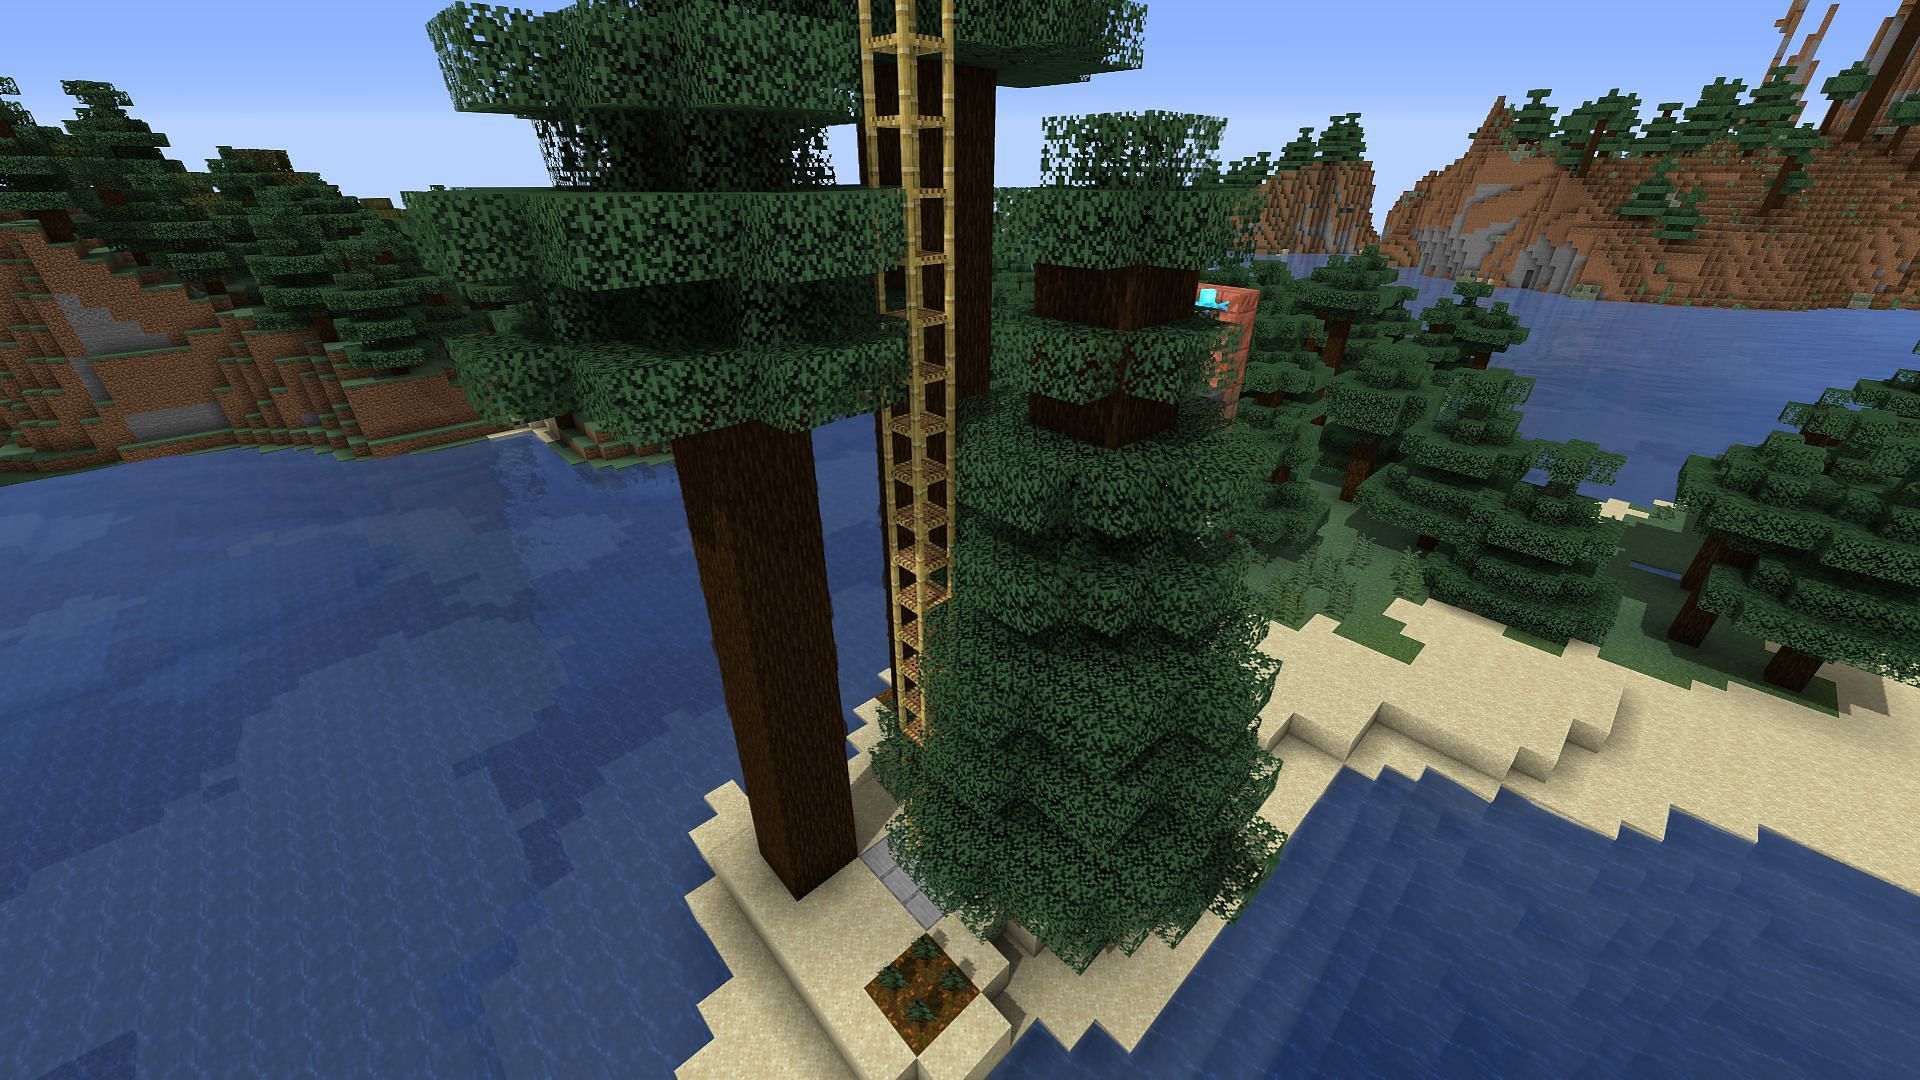 The completed tree farm, with allays and grown spruce trees (Image via Minecraft)